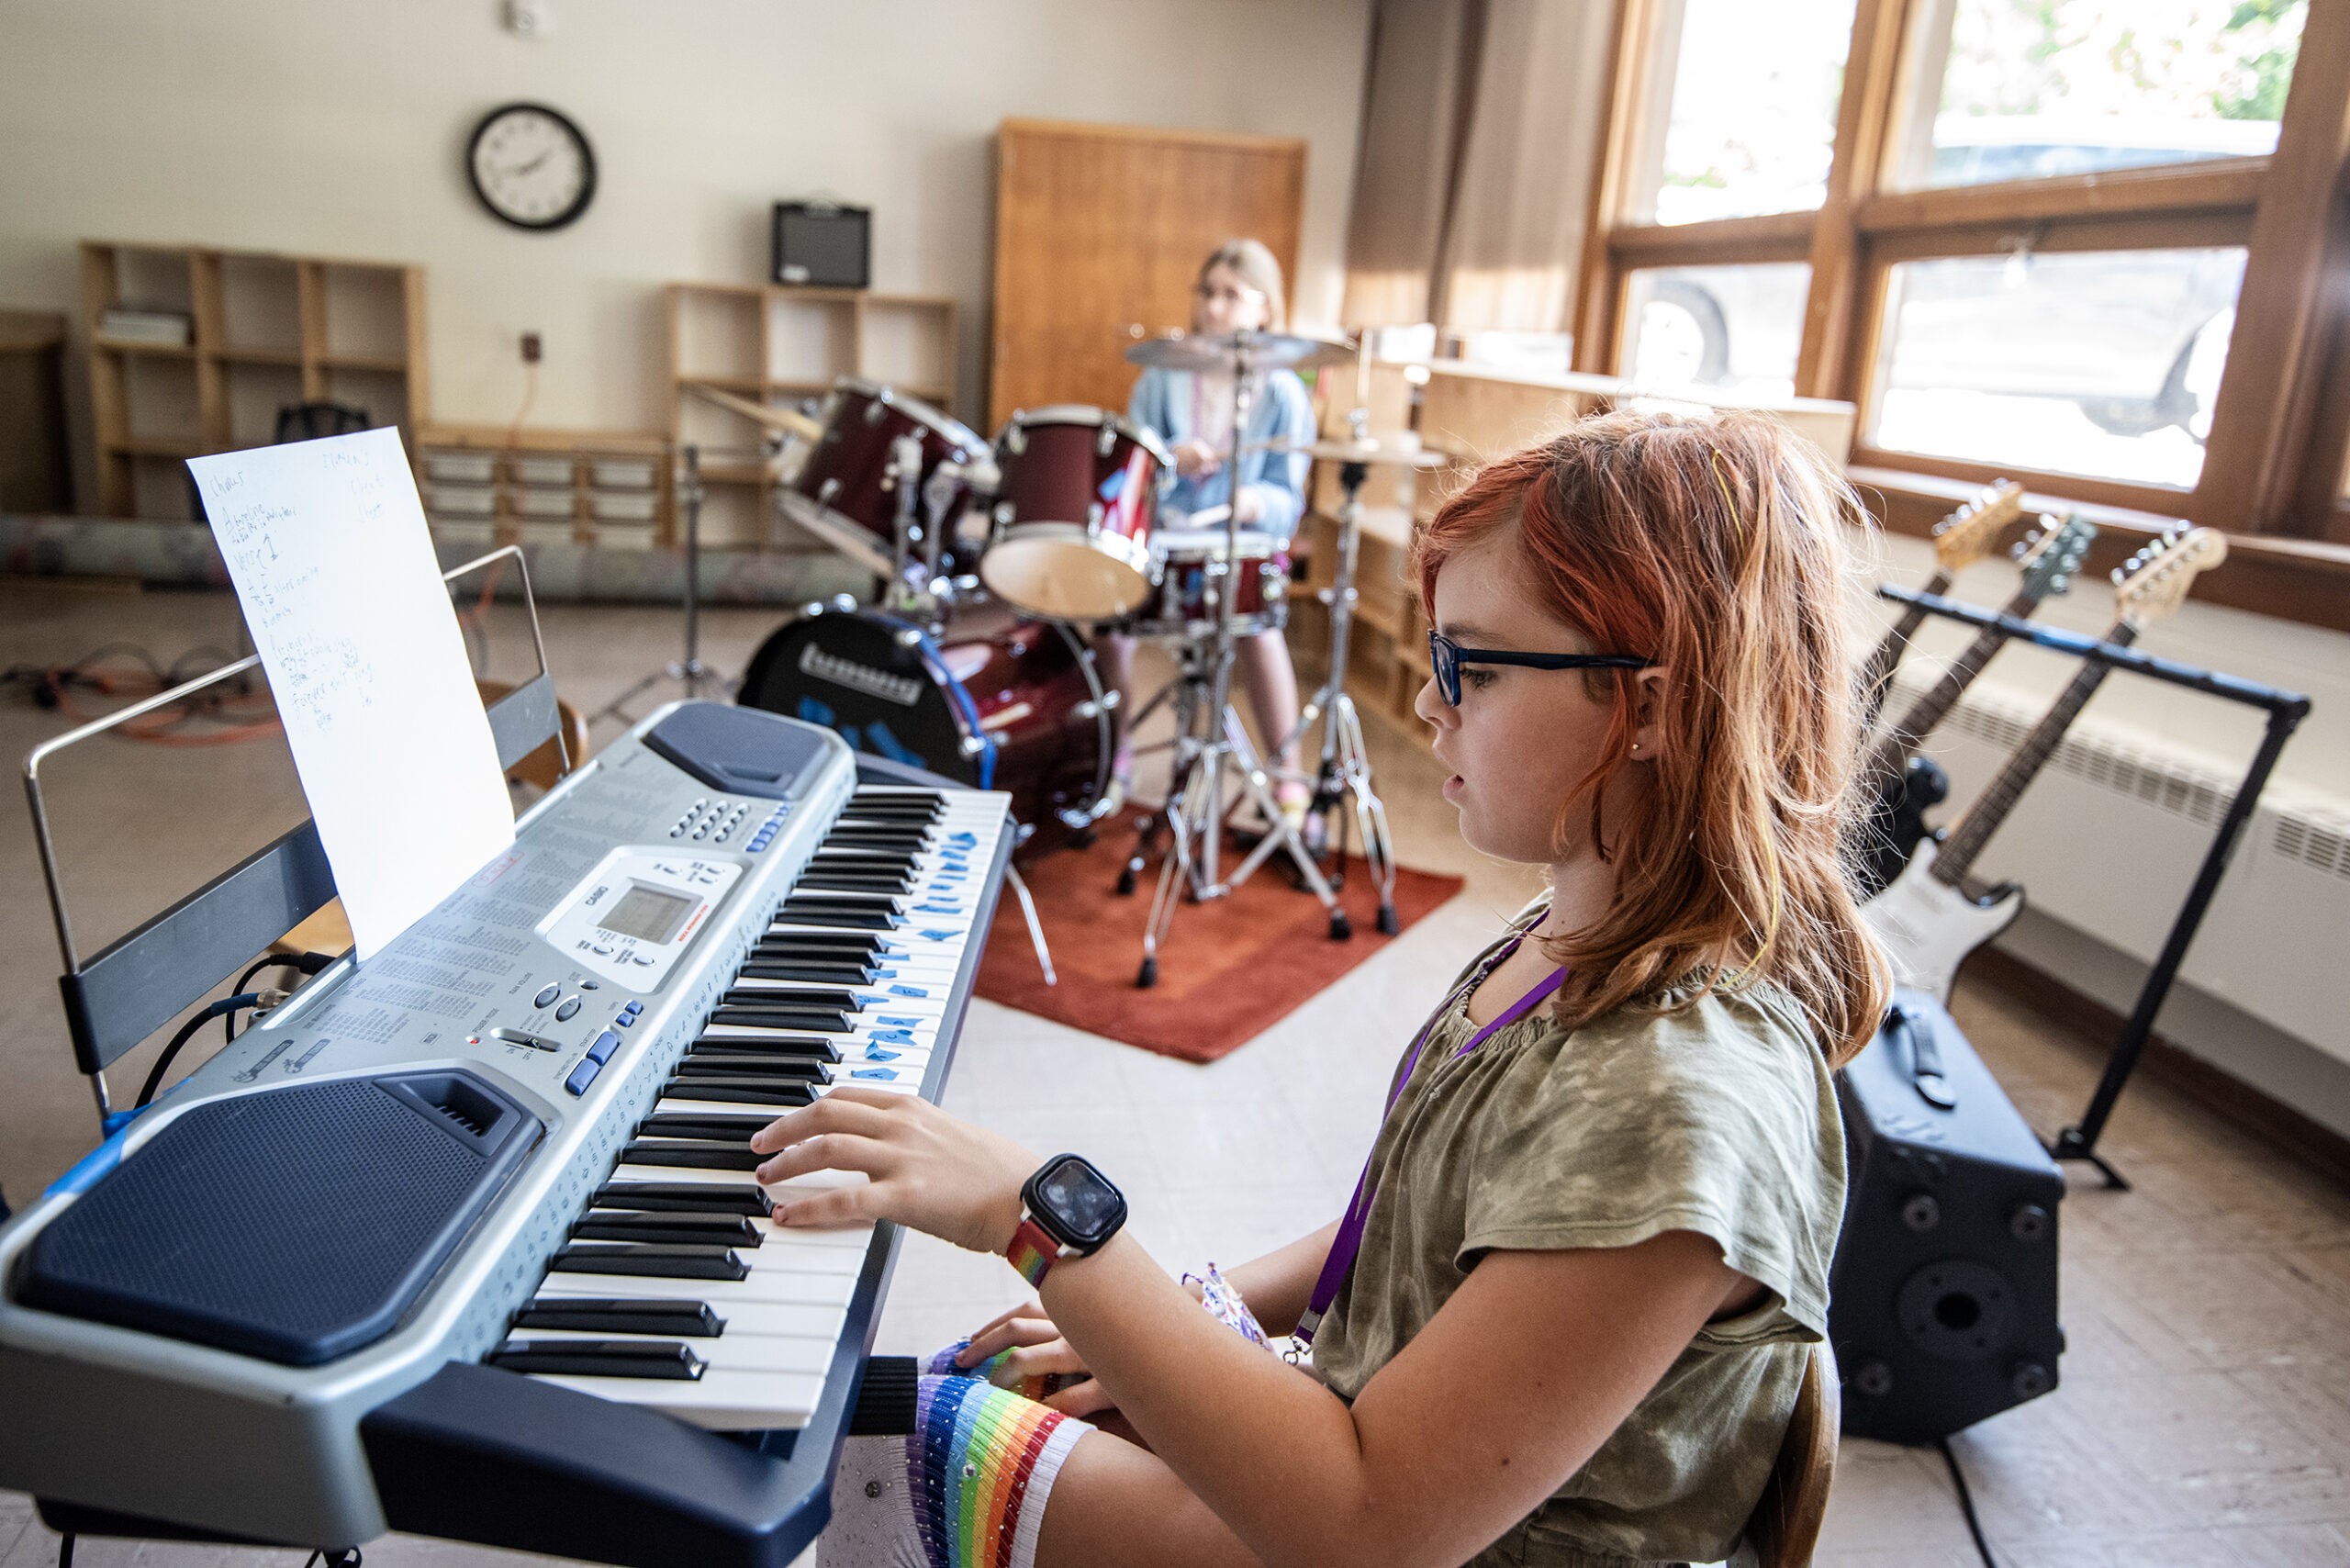 A girl plays the keyboard. A drummer is seen behind her.